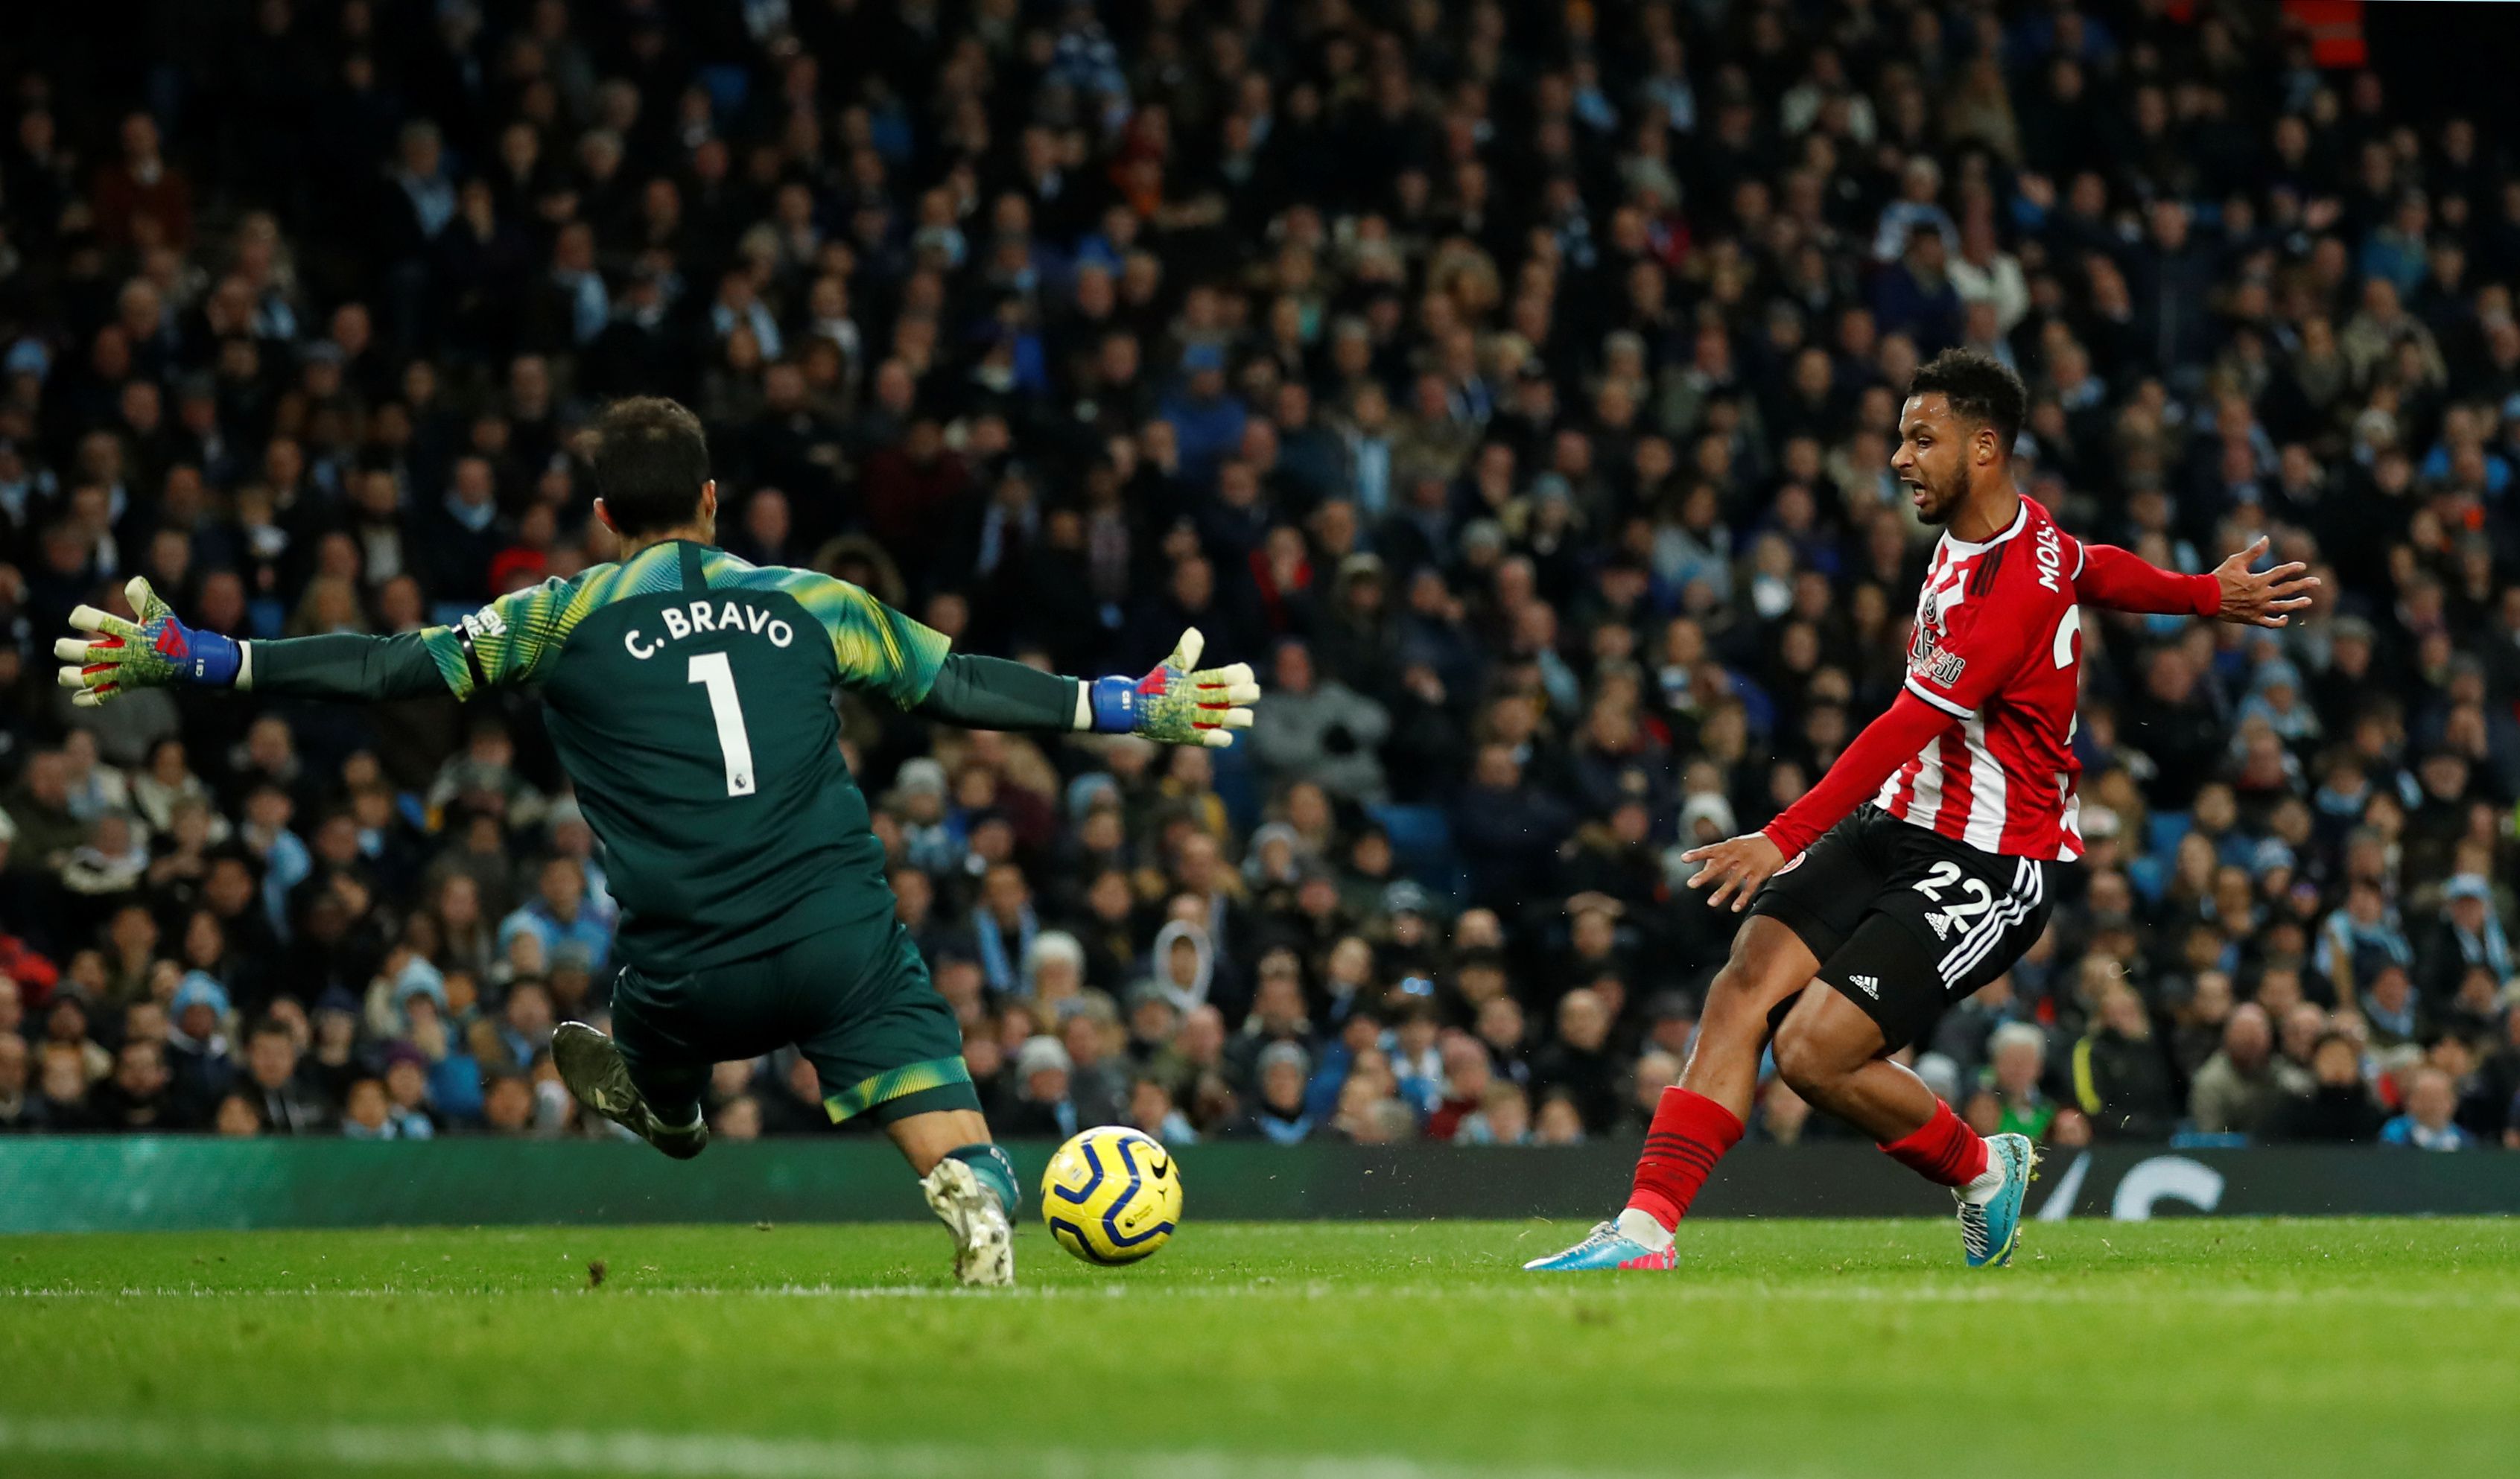 Soccer Football - Premier League - Manchester City v Sheffield United - Etihad Stadium, Manchester, Britain - December 29, 2019 Sheffield United's Lys Mousset scores a goal which is then disallowed Action Images via Reuters/Andrew Boyers EDITORIAL USE ONLY. No use with unauthorized audio, video, data, fixture lists, club/league logos or "live" services. Online in-match use limited to 75 images, no video emulation. No use in betting, games or single club/league/player publications. Please contact your account representative for further details.